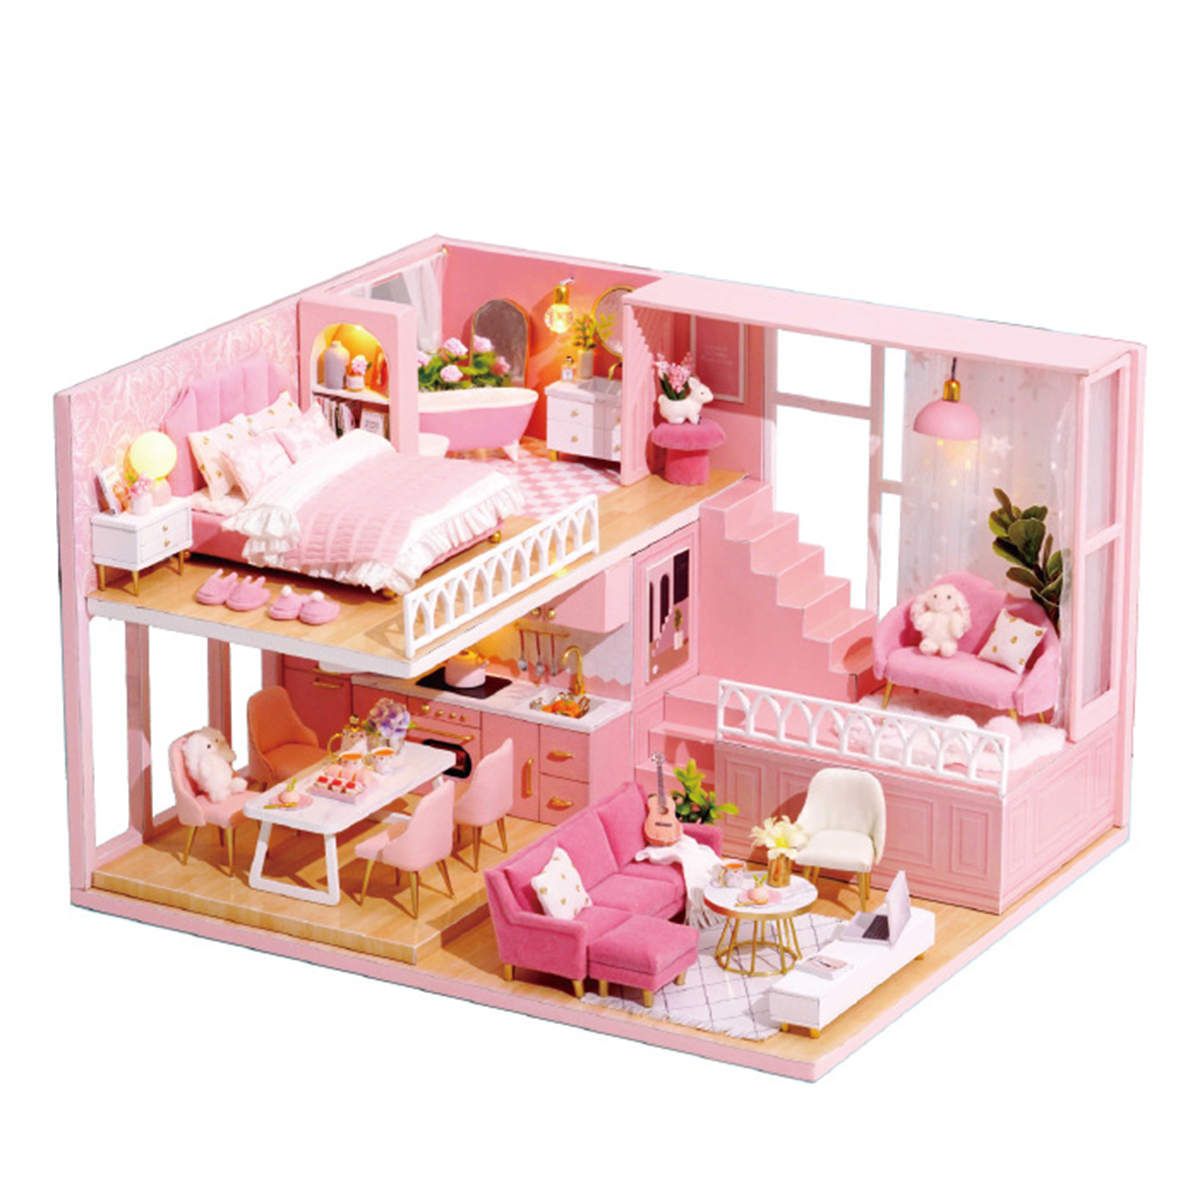 124-Wooden-3D-DIY-Handmade-Assemble-Miniature-Doll-House-Kit-Toy-with-Furniture-for-Kids-Gift-Collec-1730578-2